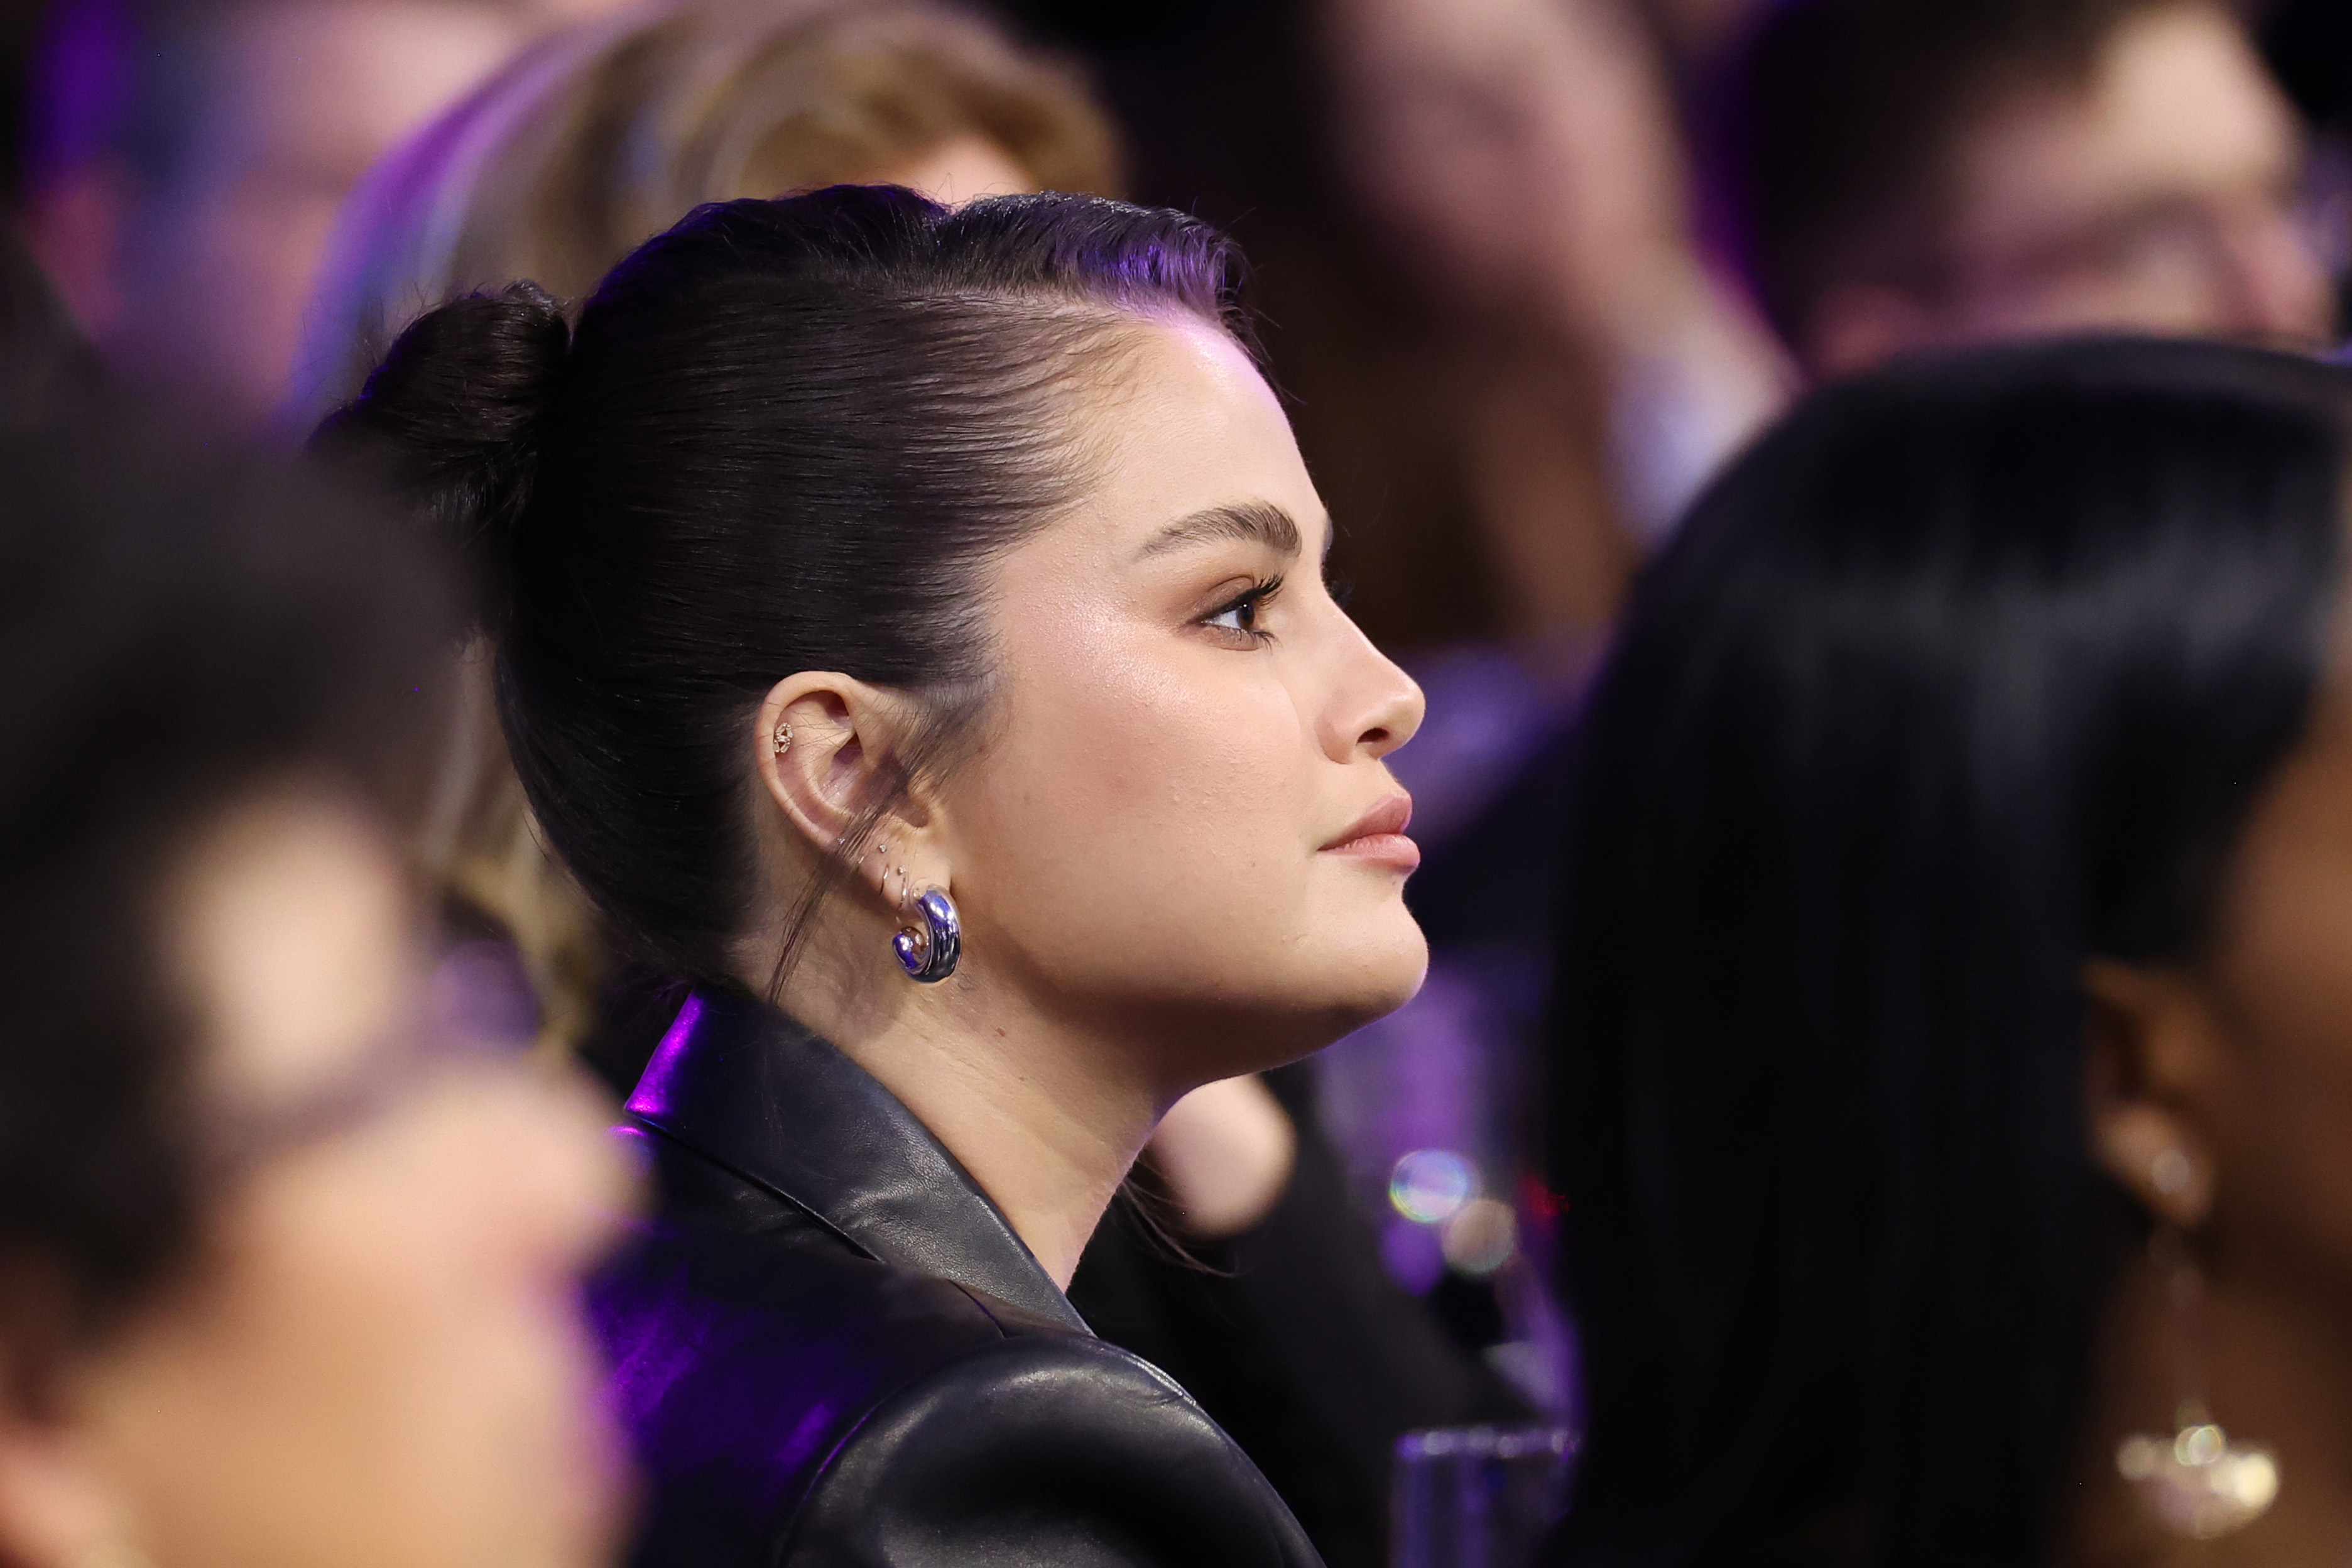 Selena Gomez, in profile, sitting in an audience.